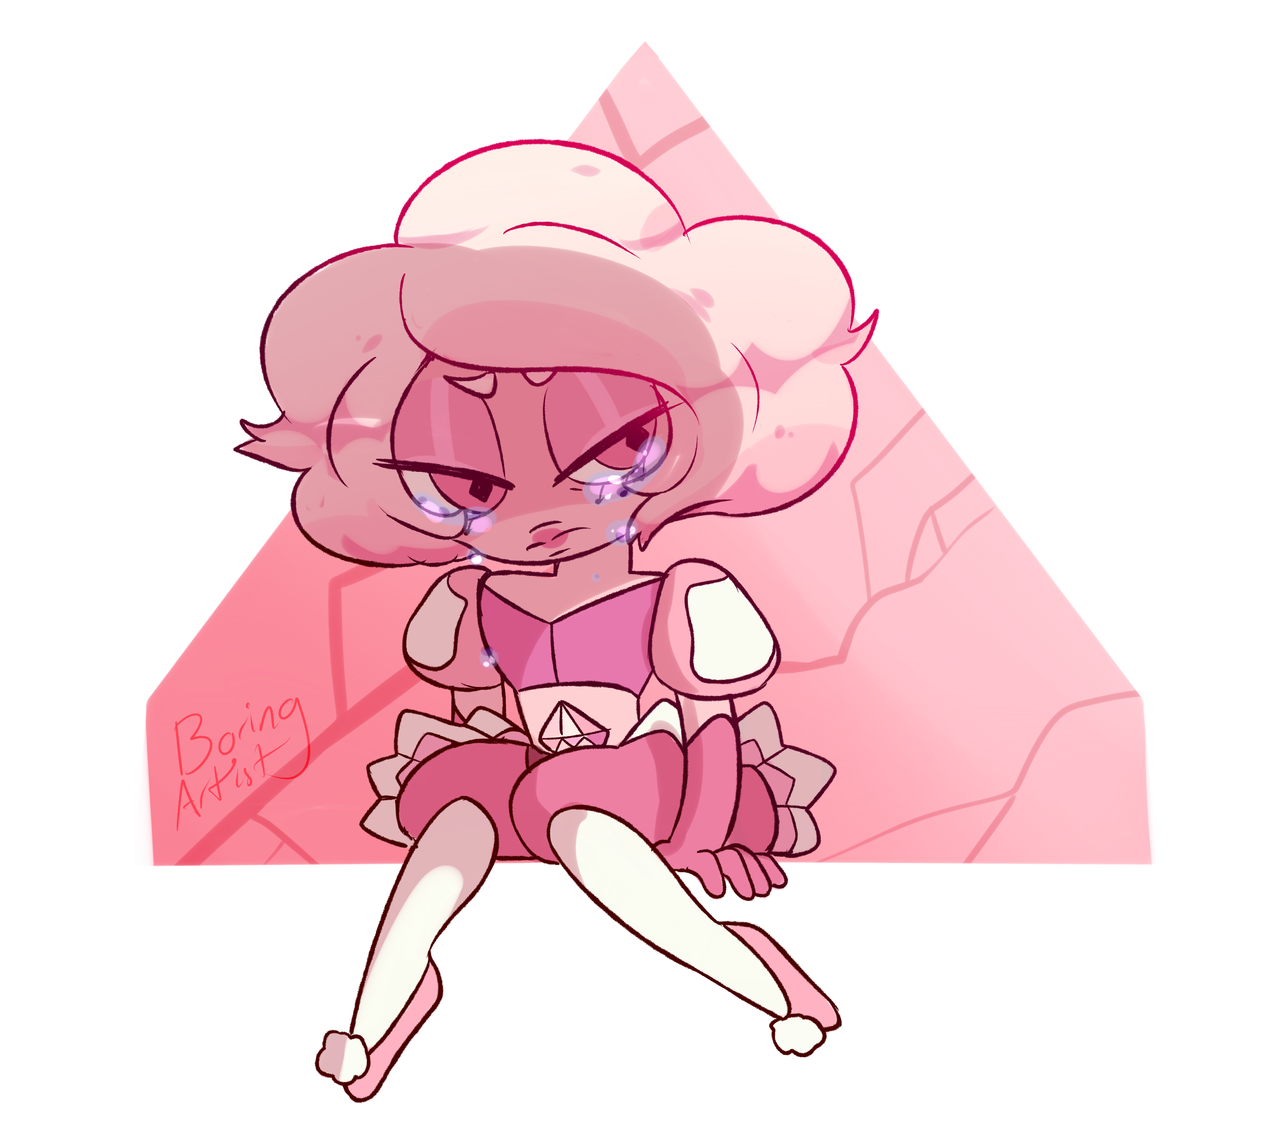 *obligatory pink diamond angst quote here* tinkerbells sad